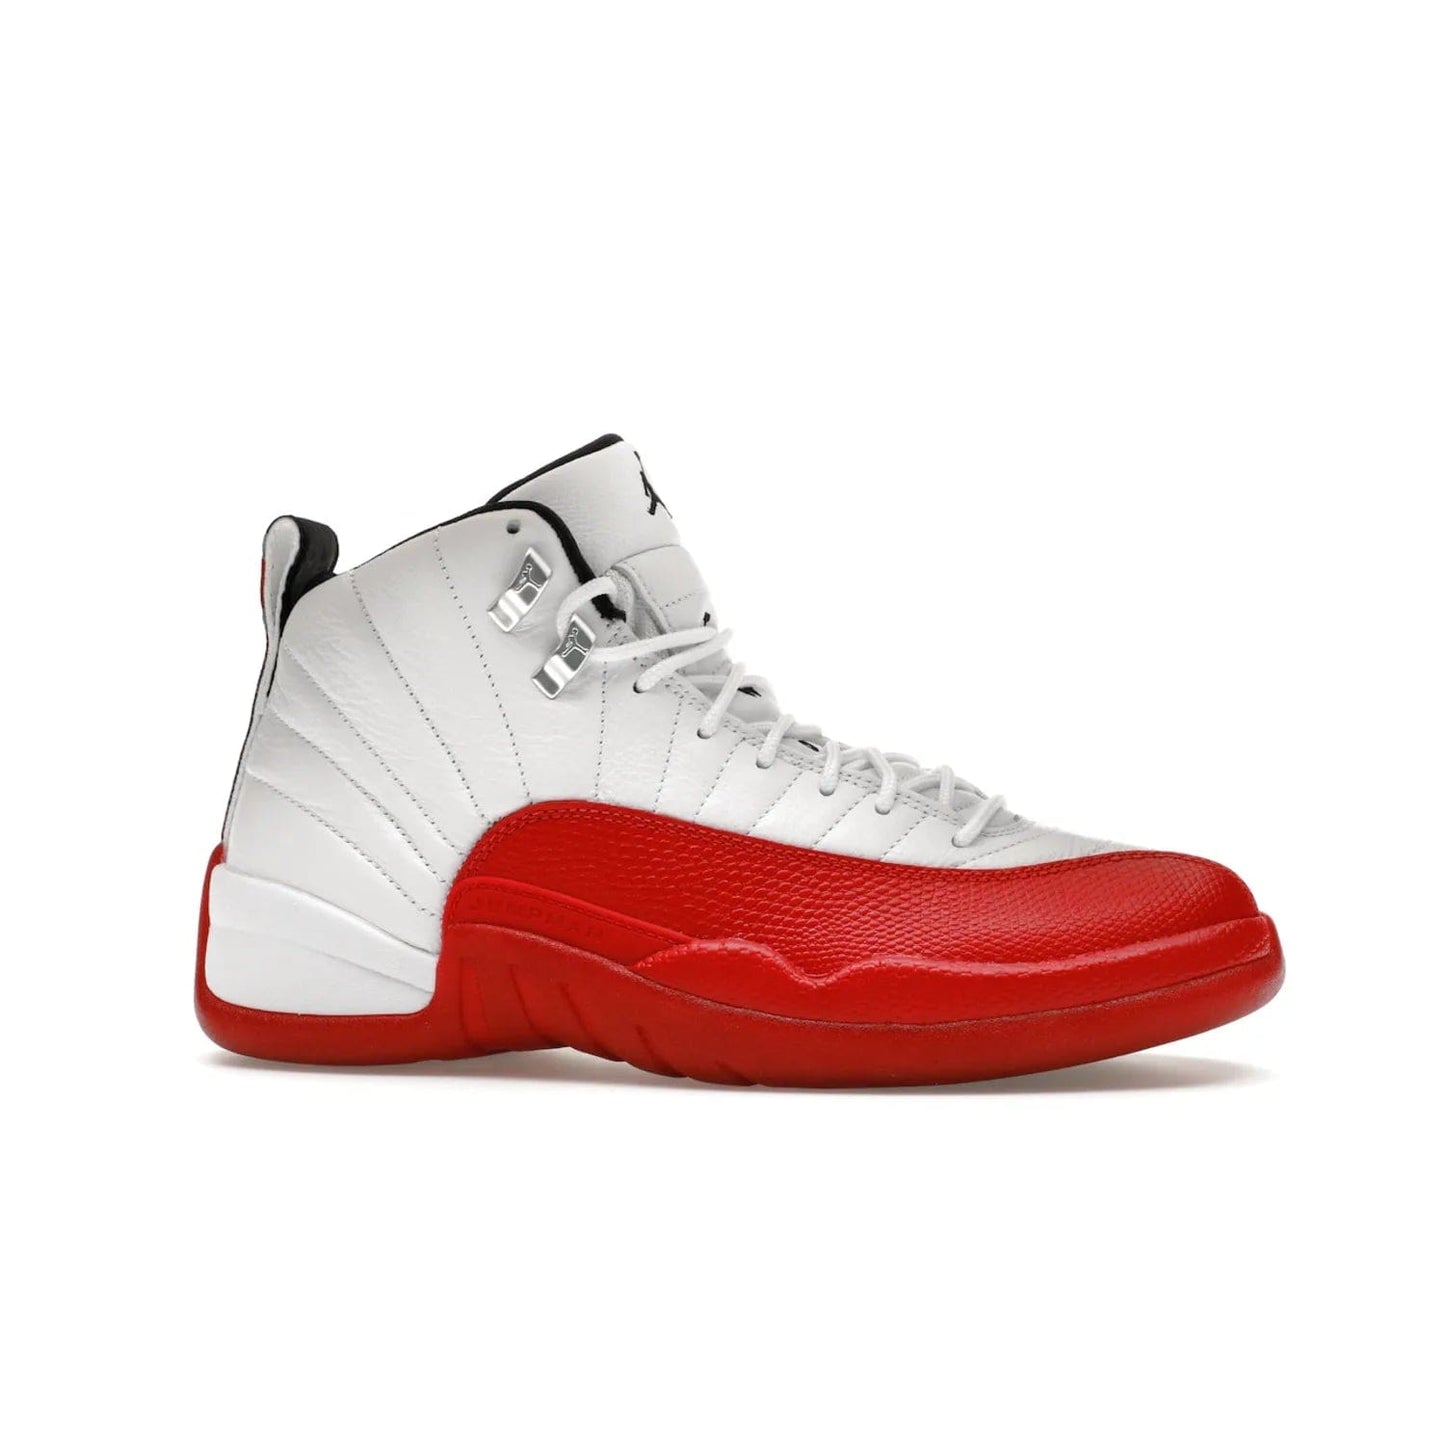 Jordan 12 Retro Cherry (2023) - Image 2 - Only at www.BallersClubKickz.com - Live your sneaker legend with the Jordan 12 Retro Cherry. Iconic pebbled leather mudguards, quilted uppers, and varsity red accents make this 1997 classic a must-have for 2023. Shine on with silver hardware and matching midsoles, and bring it all together for limited-edition style on October 28th. Step into Jordan legacy with the Retro Cherry.